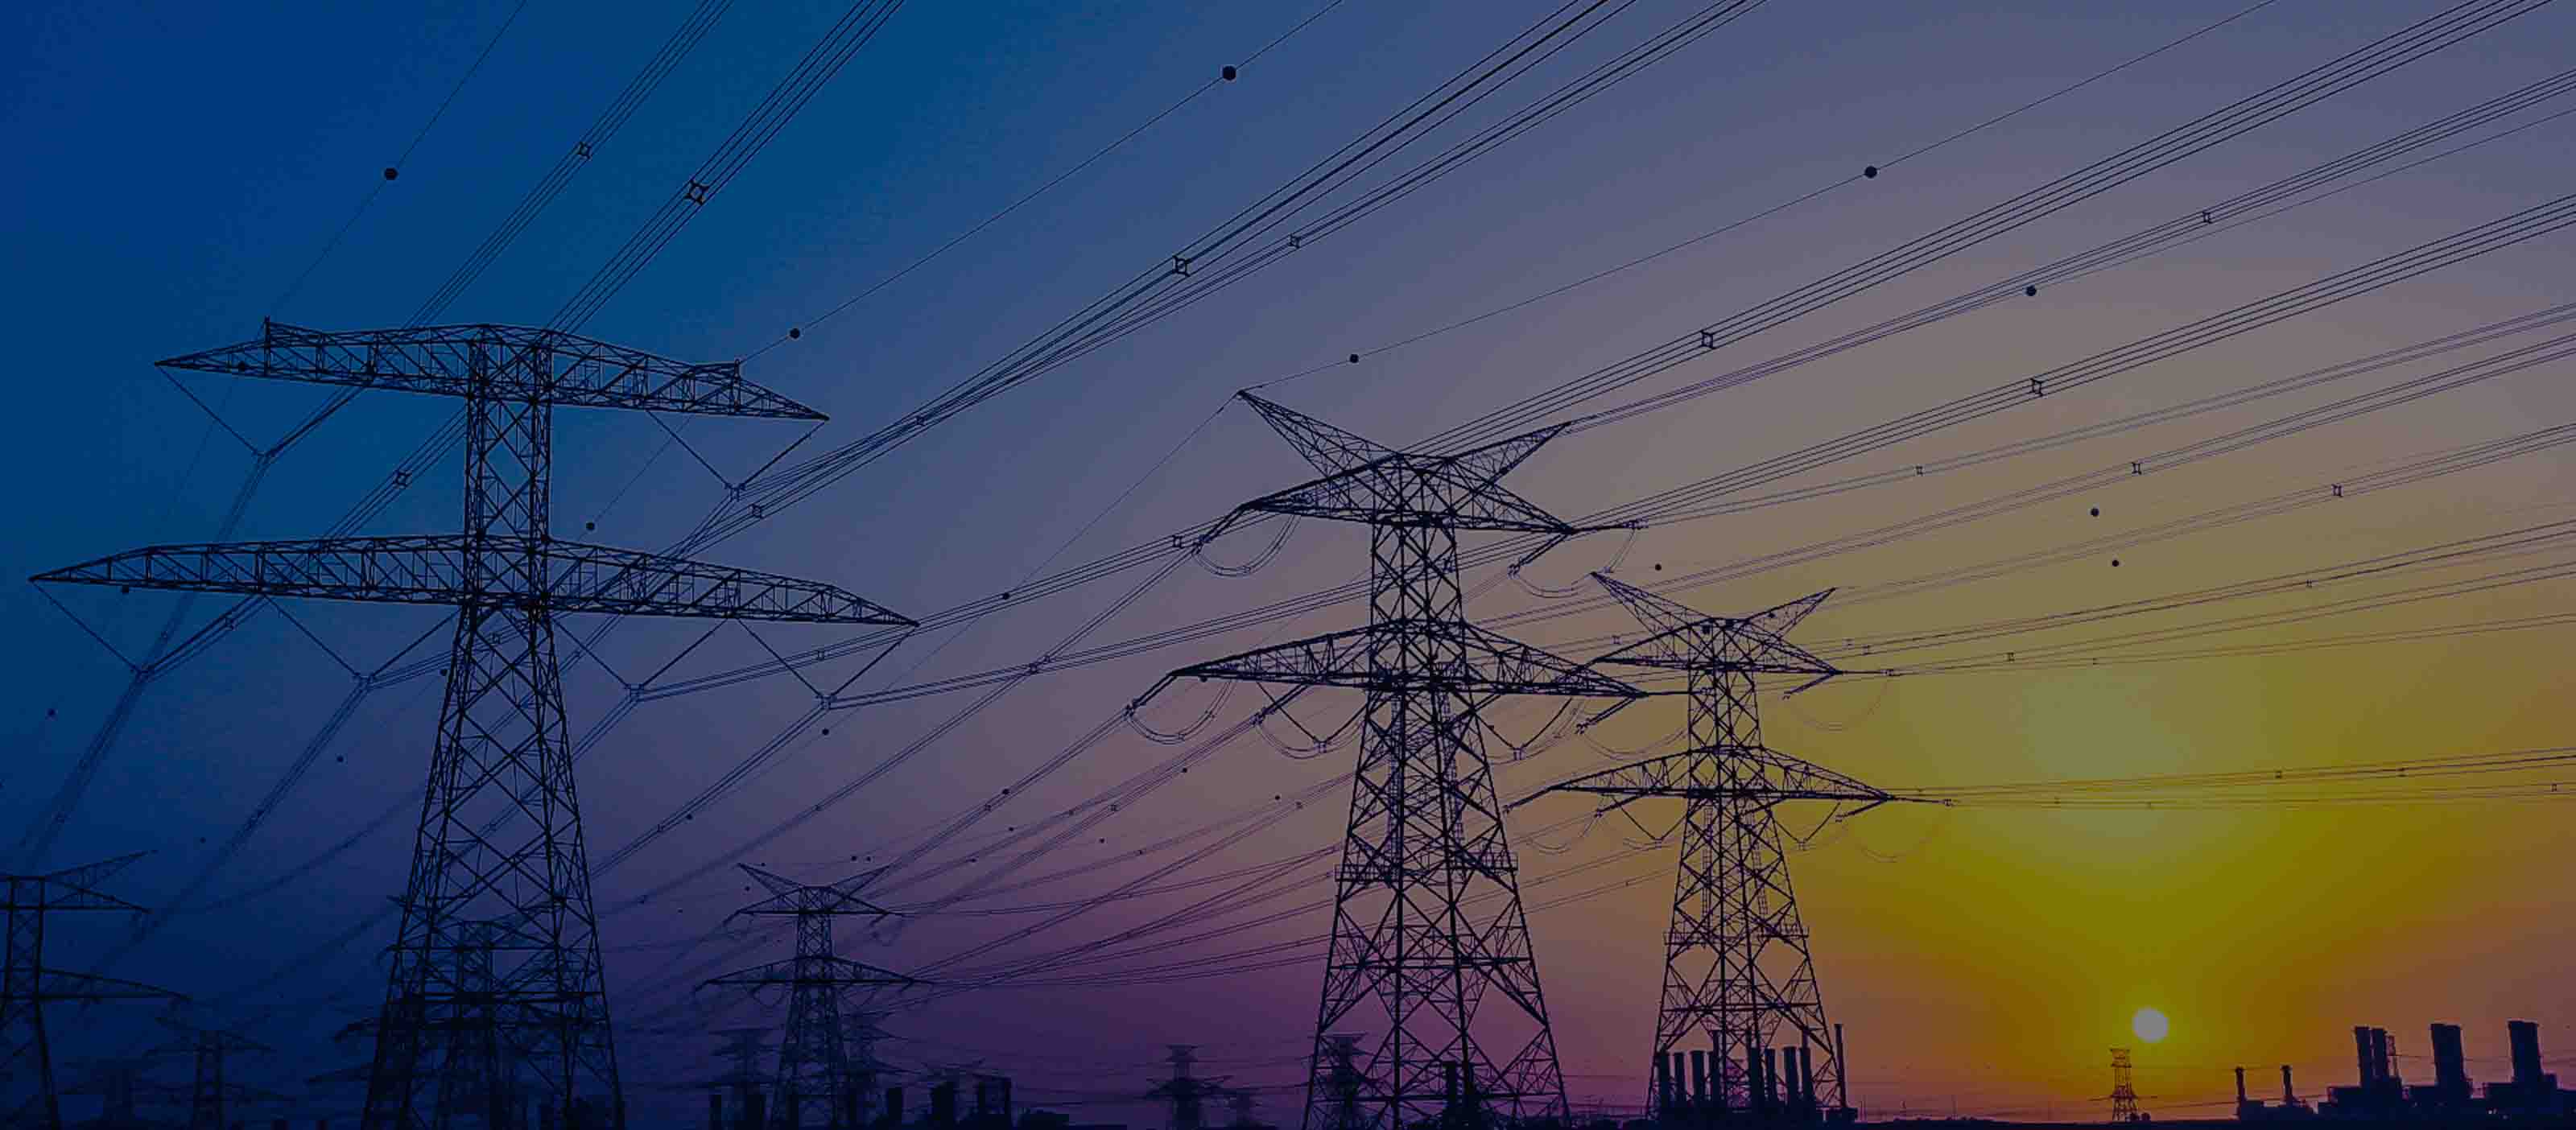 Transmission lines | Software for power utilities | GE Digital